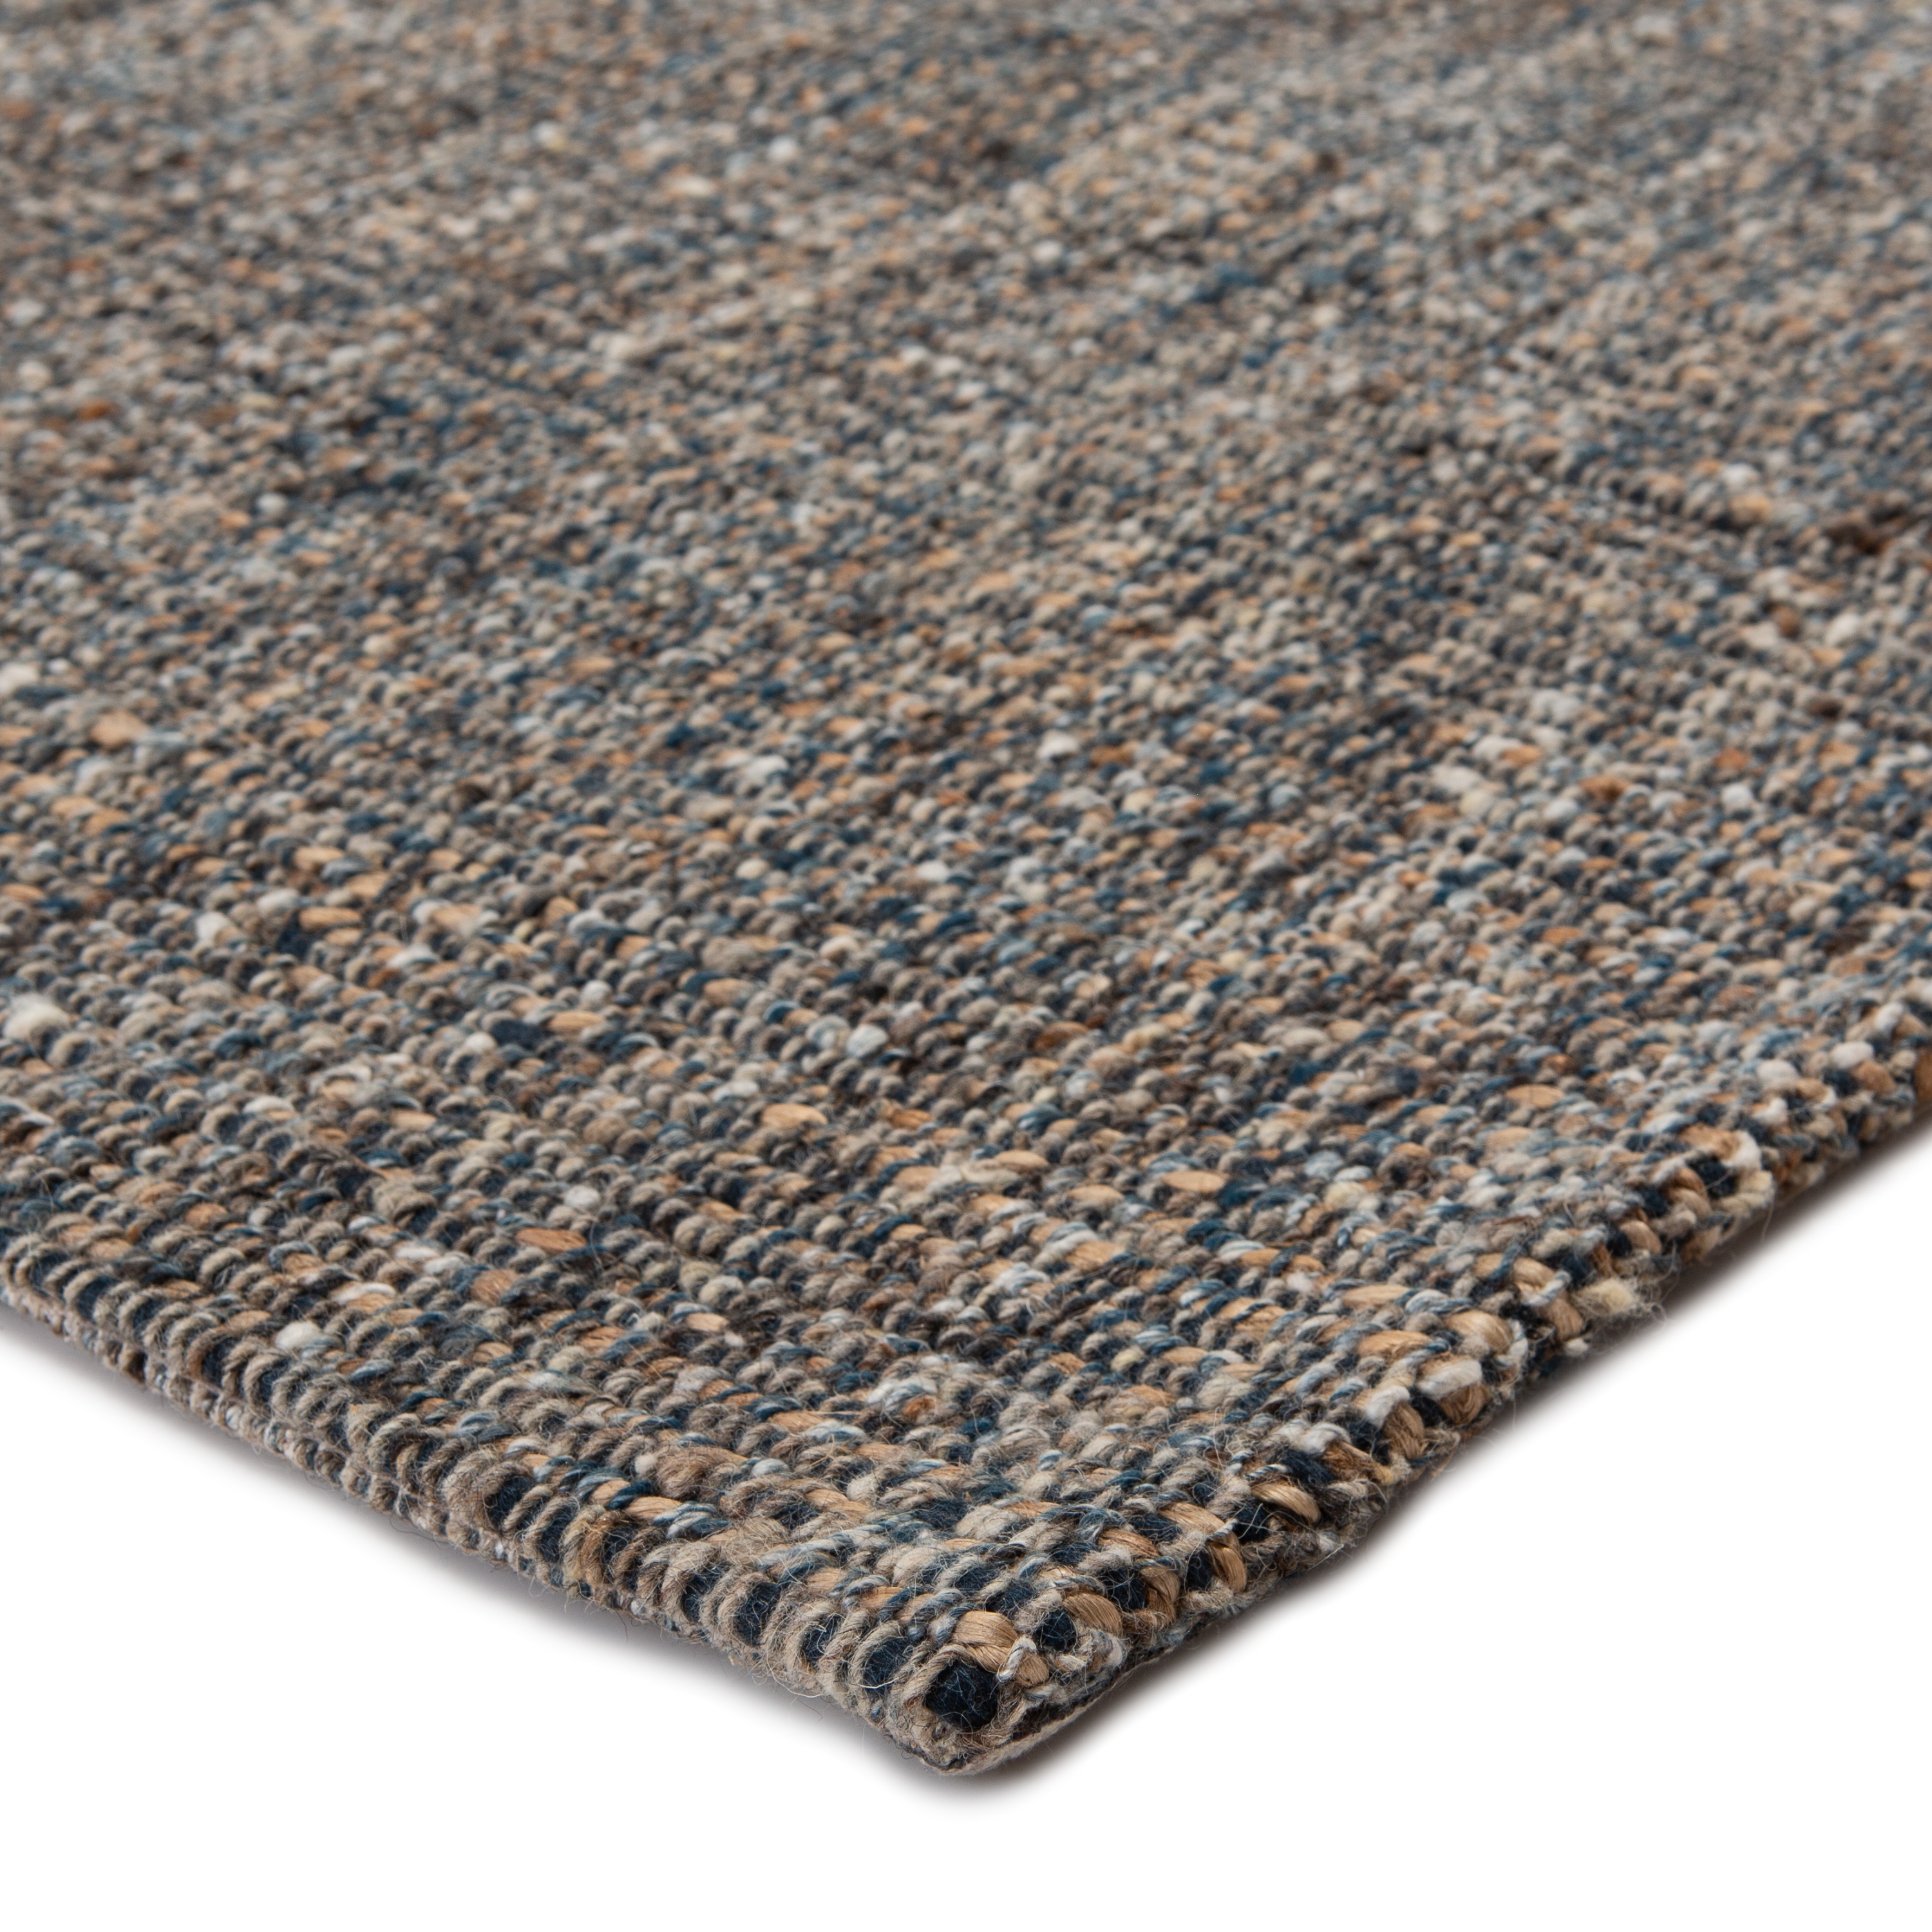 Sutton Natural Solid Gray/ Blue Area Rug (2'X3') - Image 1